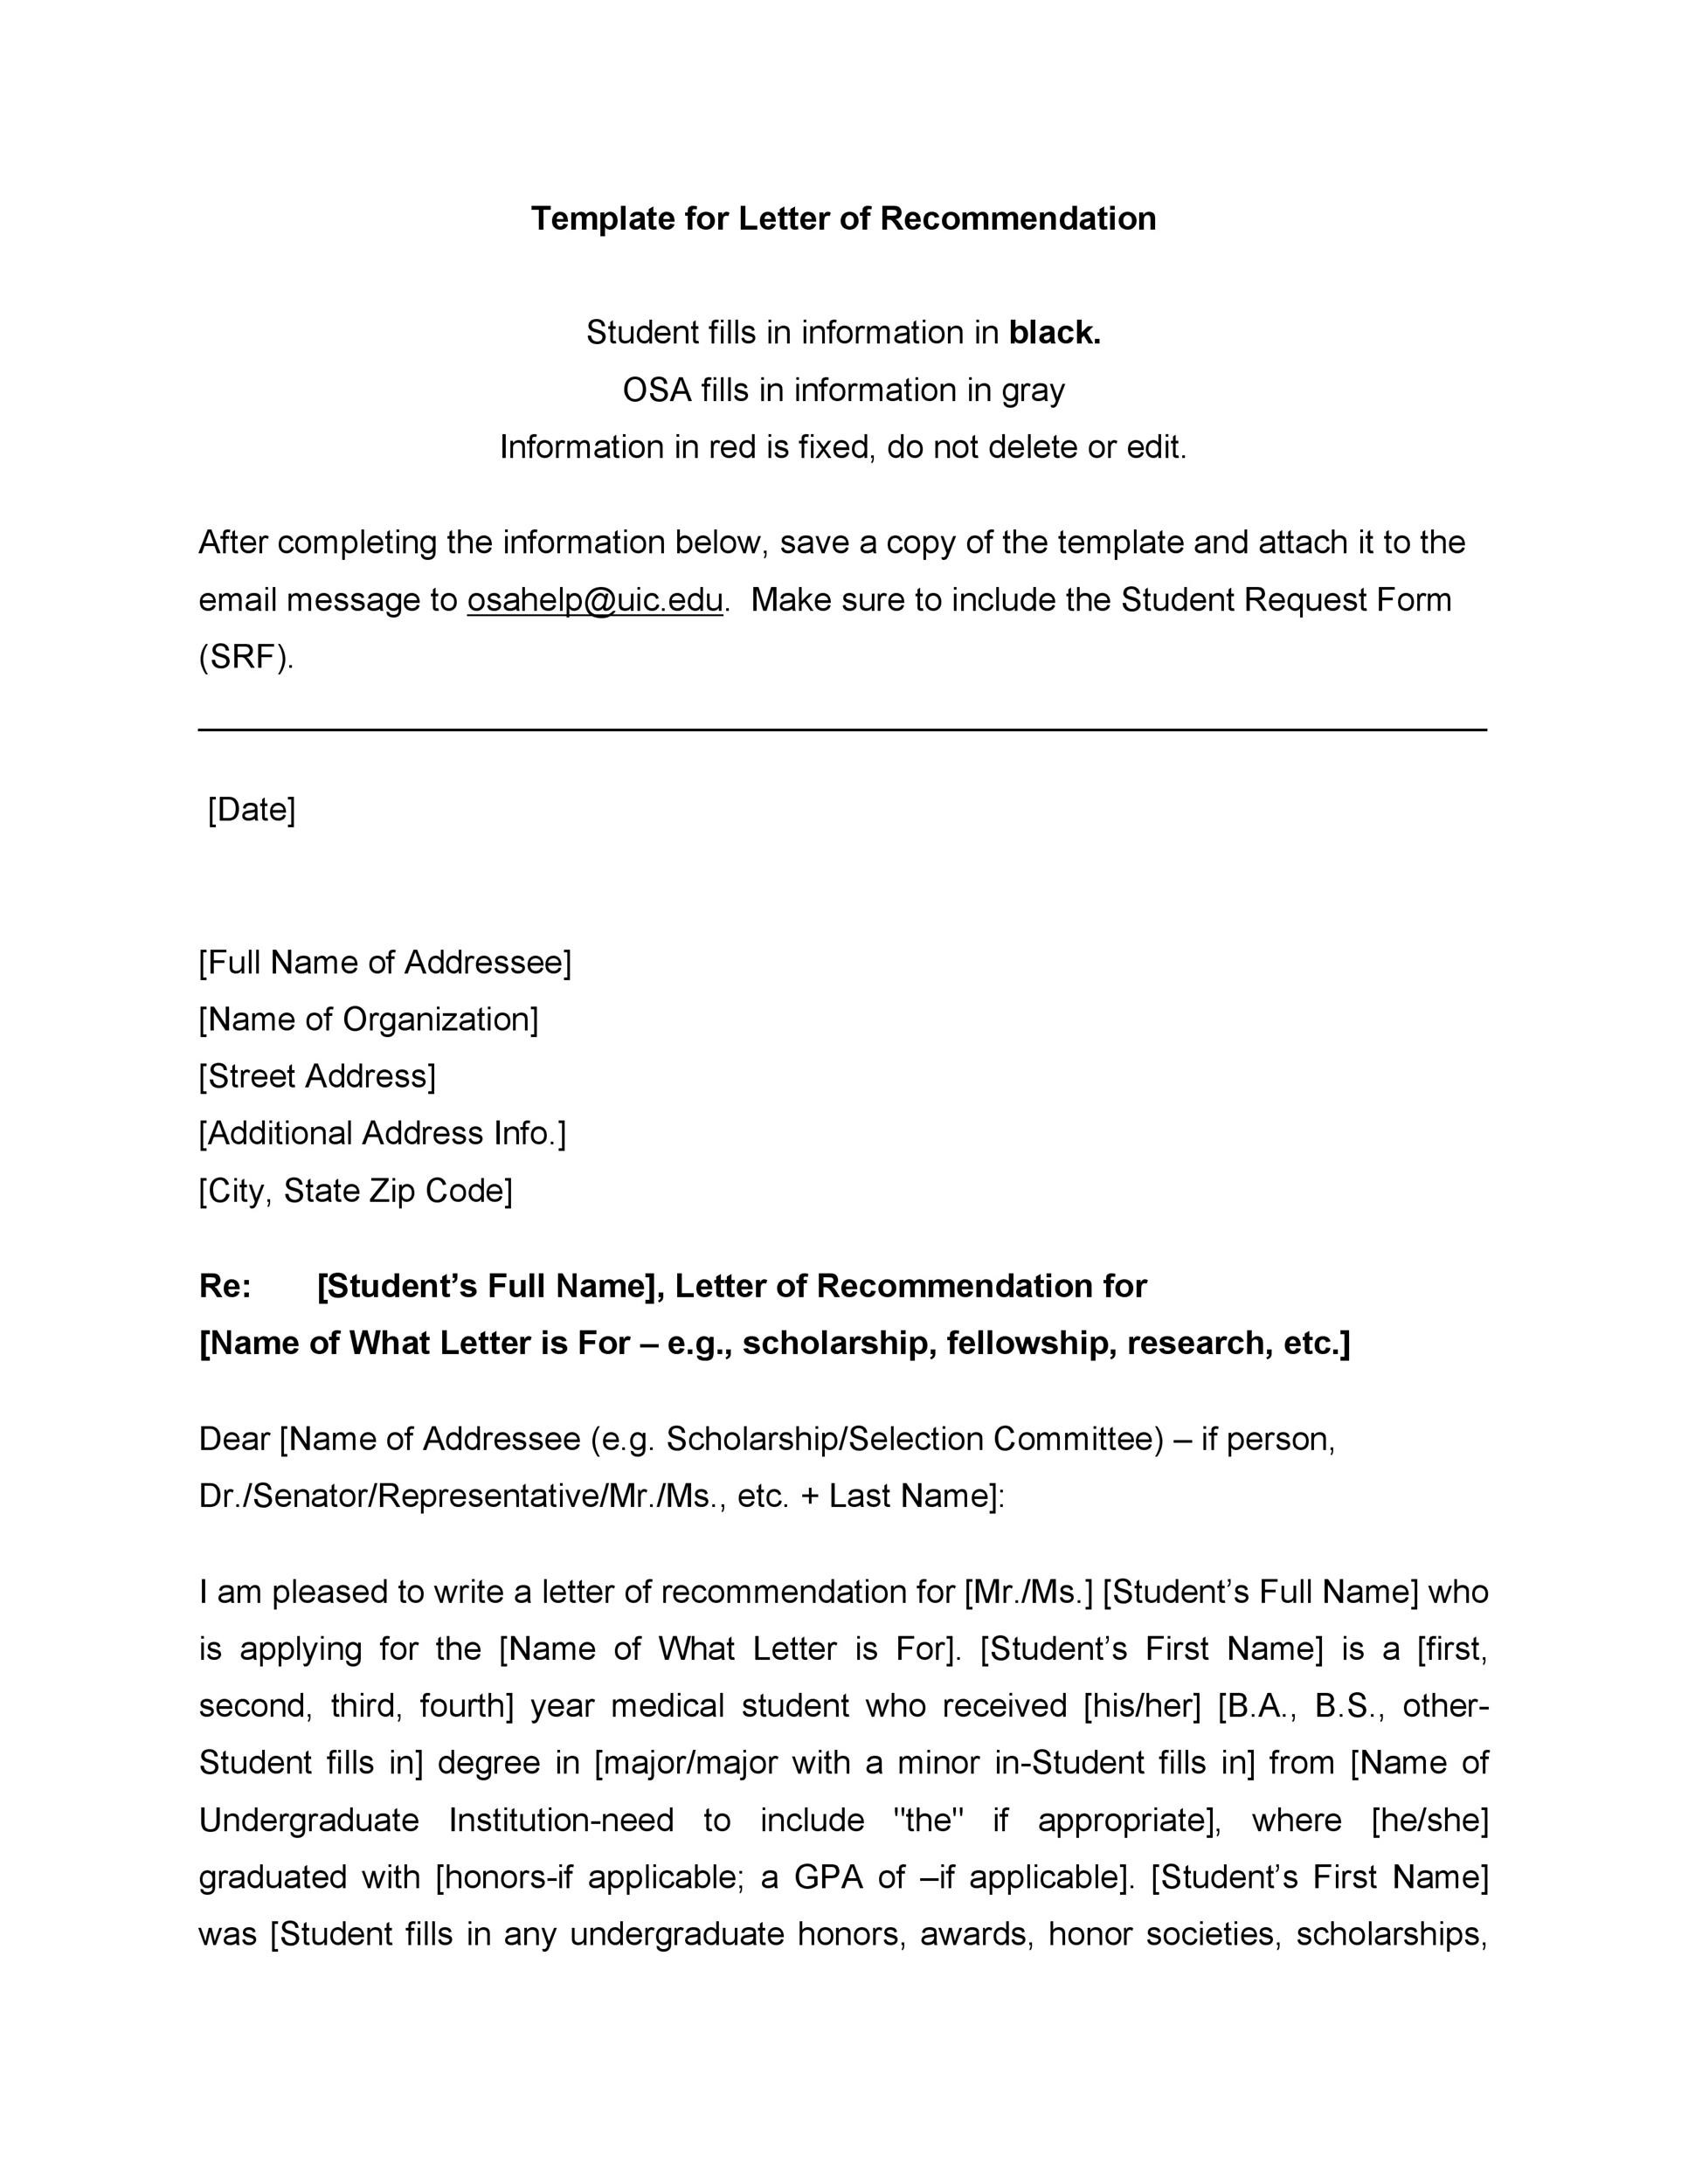 Sample Student Recommendation Letter from templatelab.com